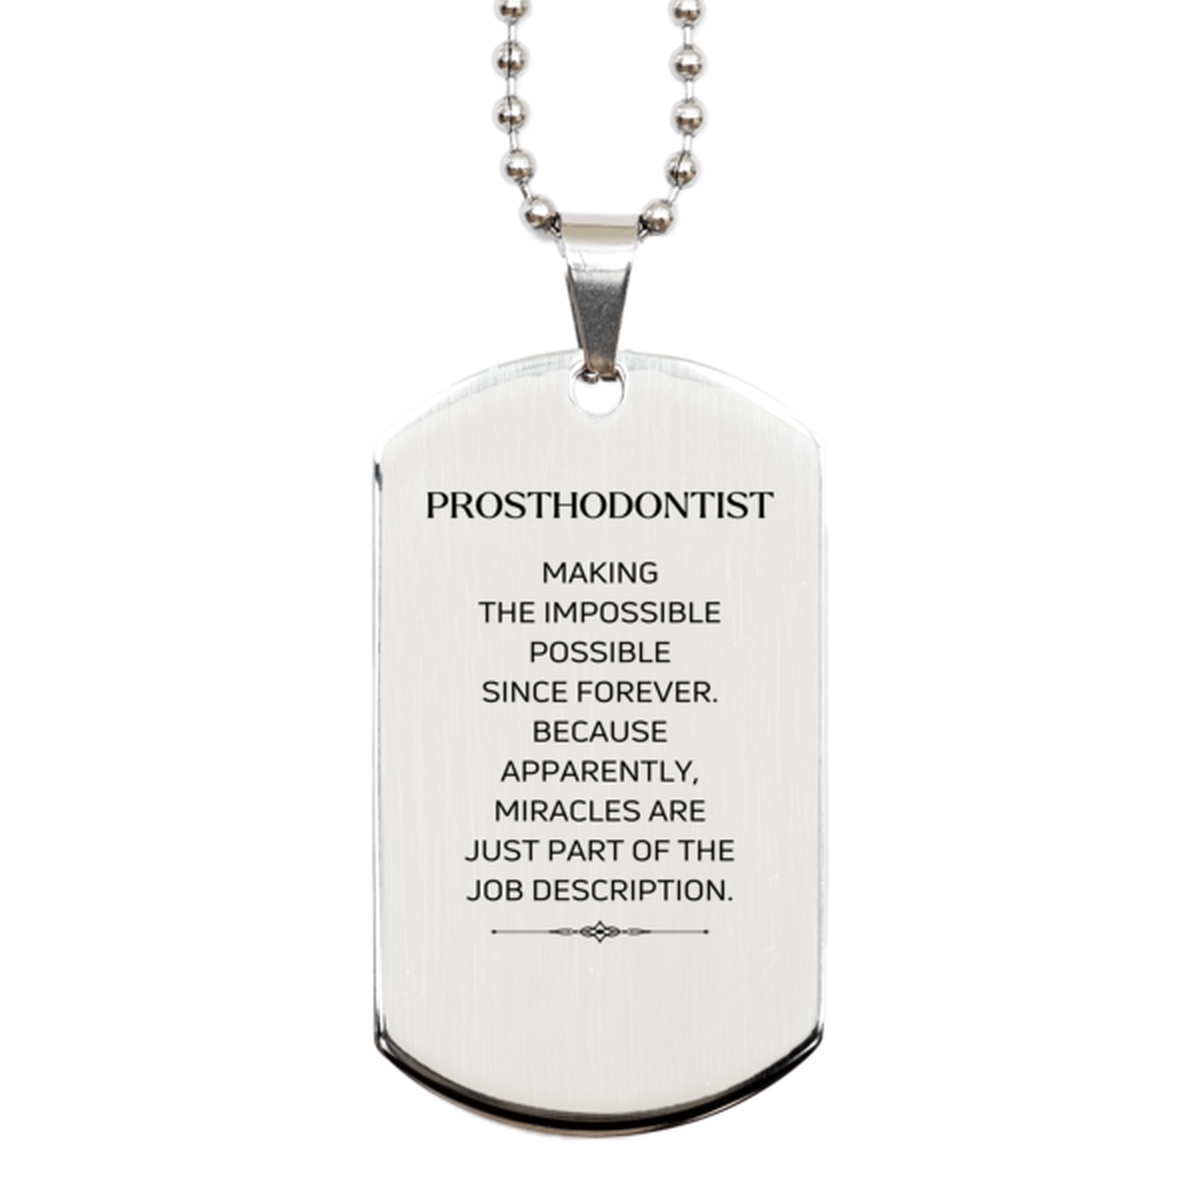 Funny Prosthodontist Gifts, Miracles are just part of the job description, Inspirational Birthday Silver Dog Tag For Prosthodontist, Men, Women, Coworkers, Friends, Boss